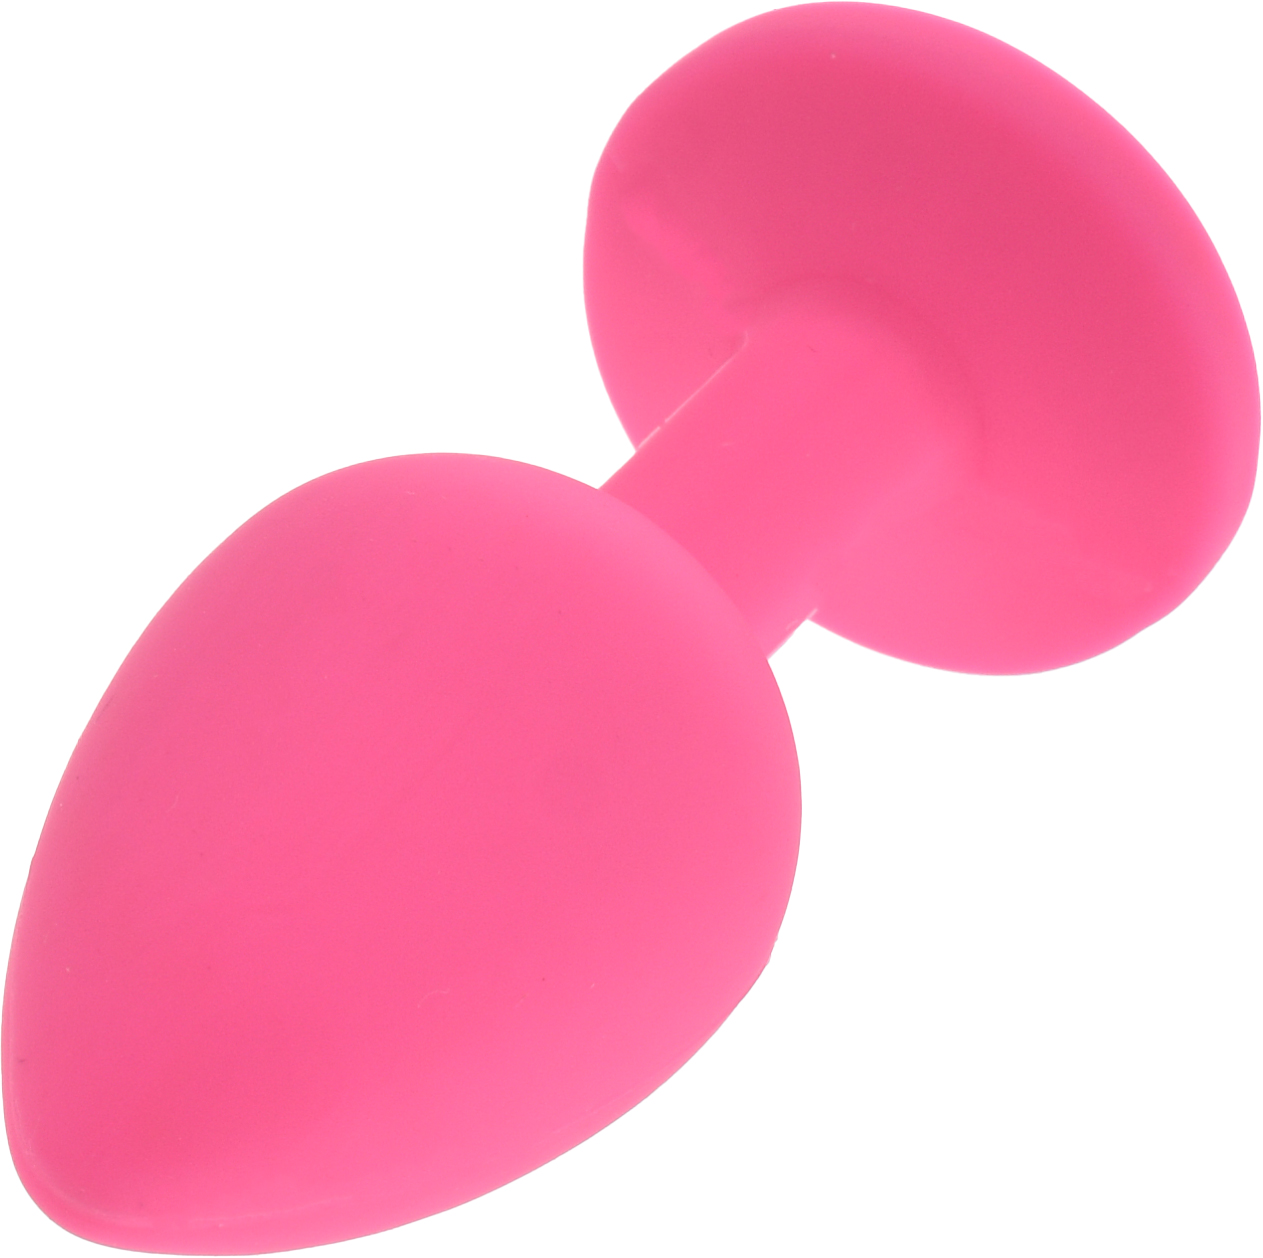 Dop Anal Silicone Buttplug Small Roz/Tra in SexShop KUR Romania